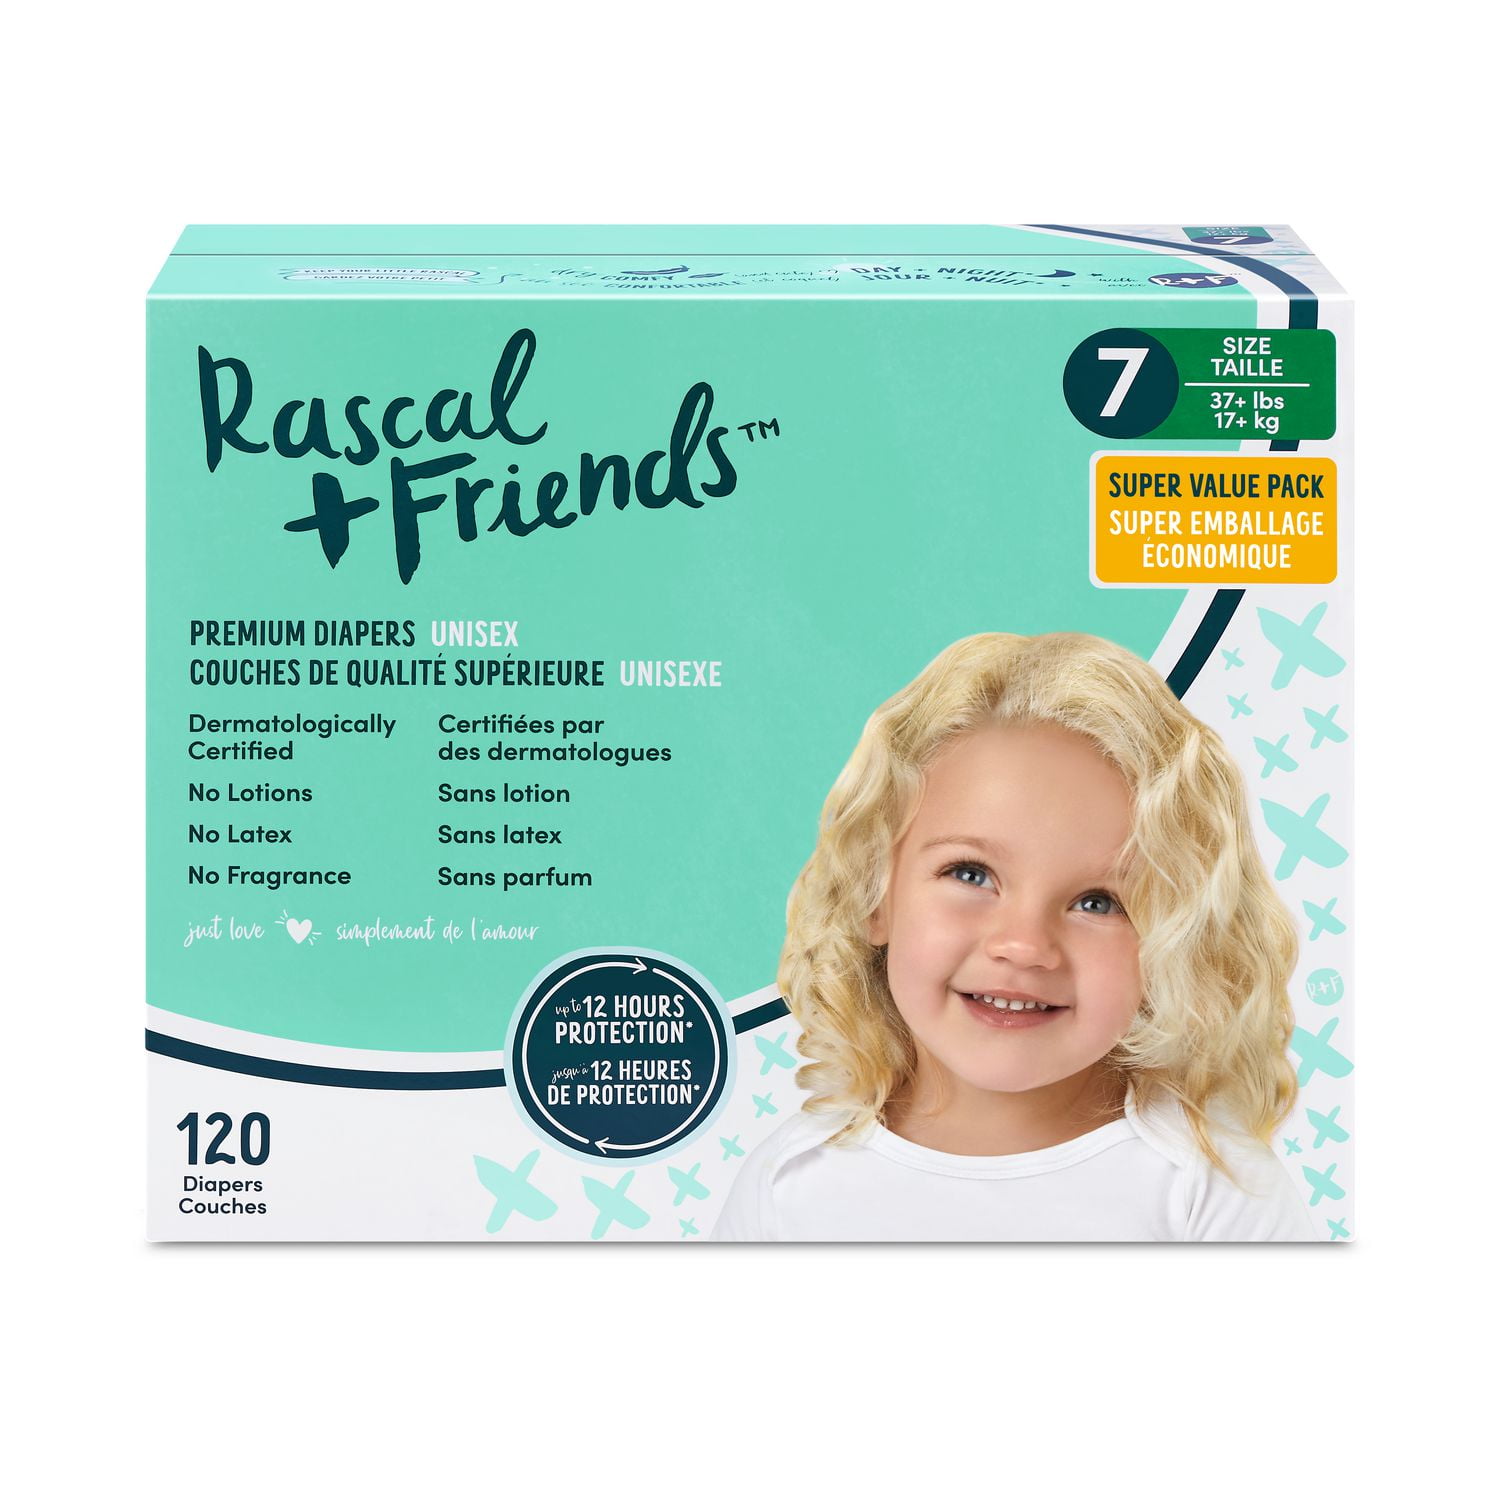 Rascal + Friends Diapers reviews in Diapers - Disposable Diapers -  ChickAdvisor